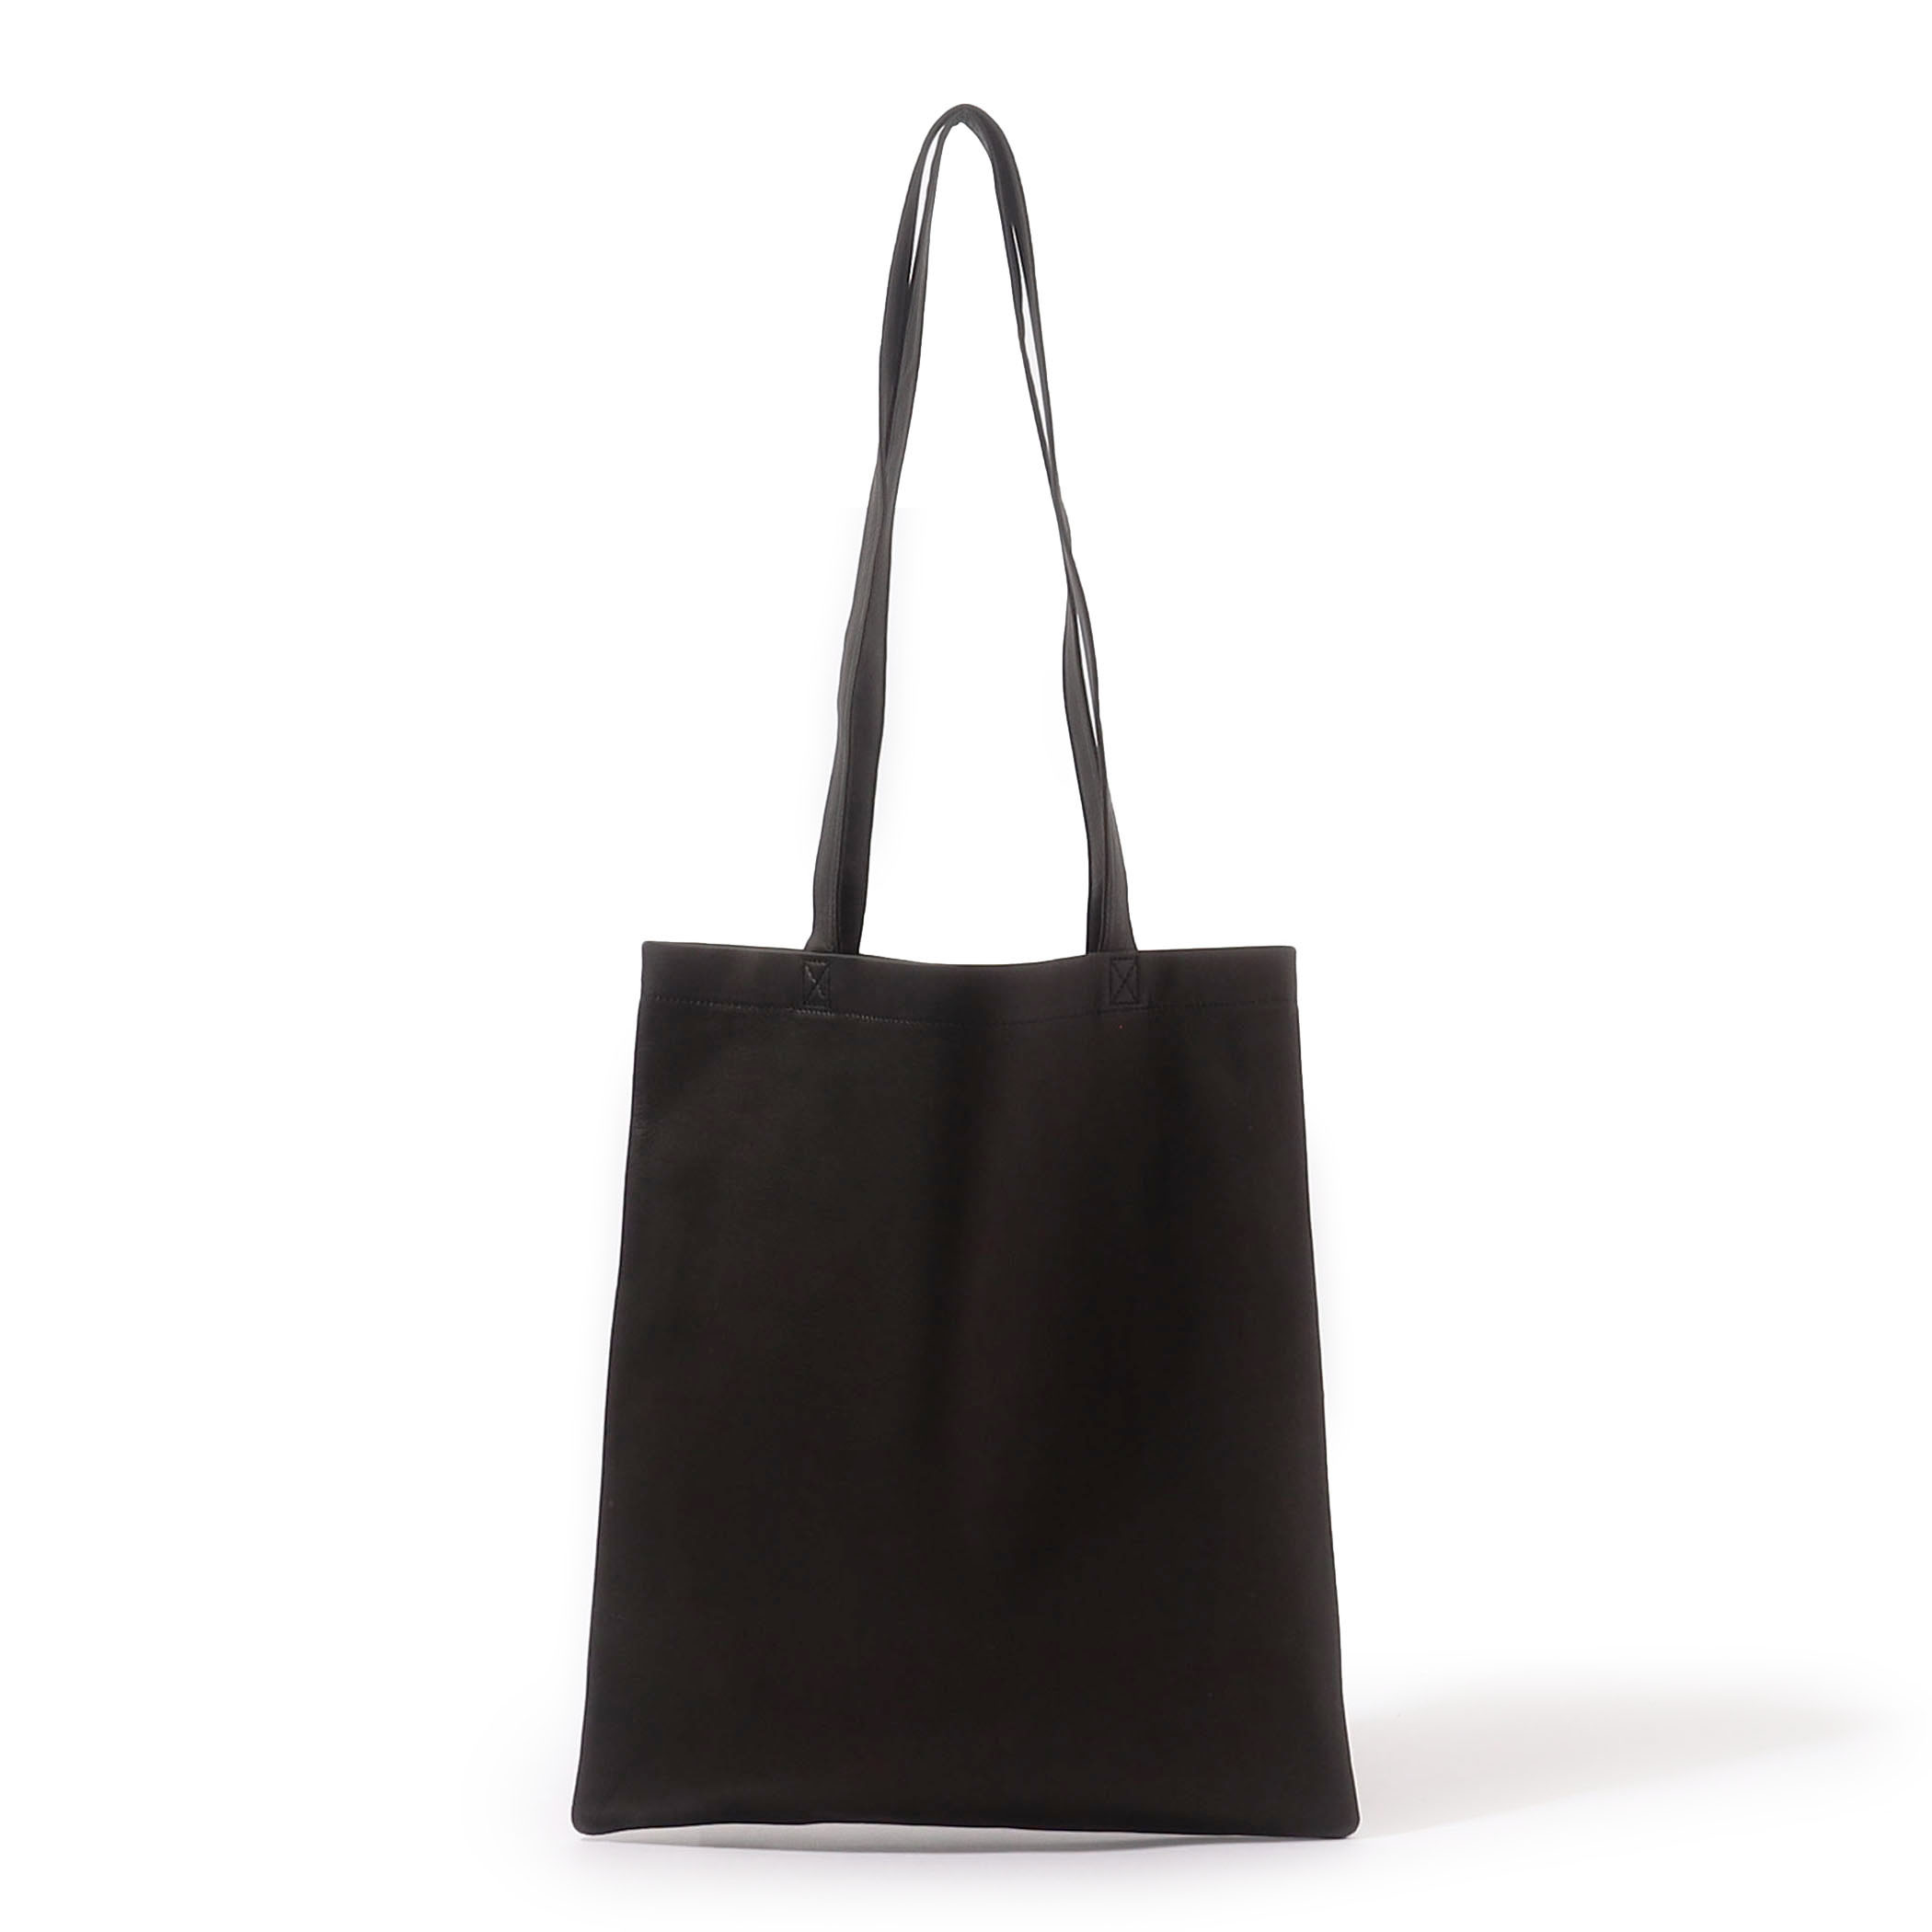 Aeta アエタDOUBLE FACED TOTE BAG トートバッグ